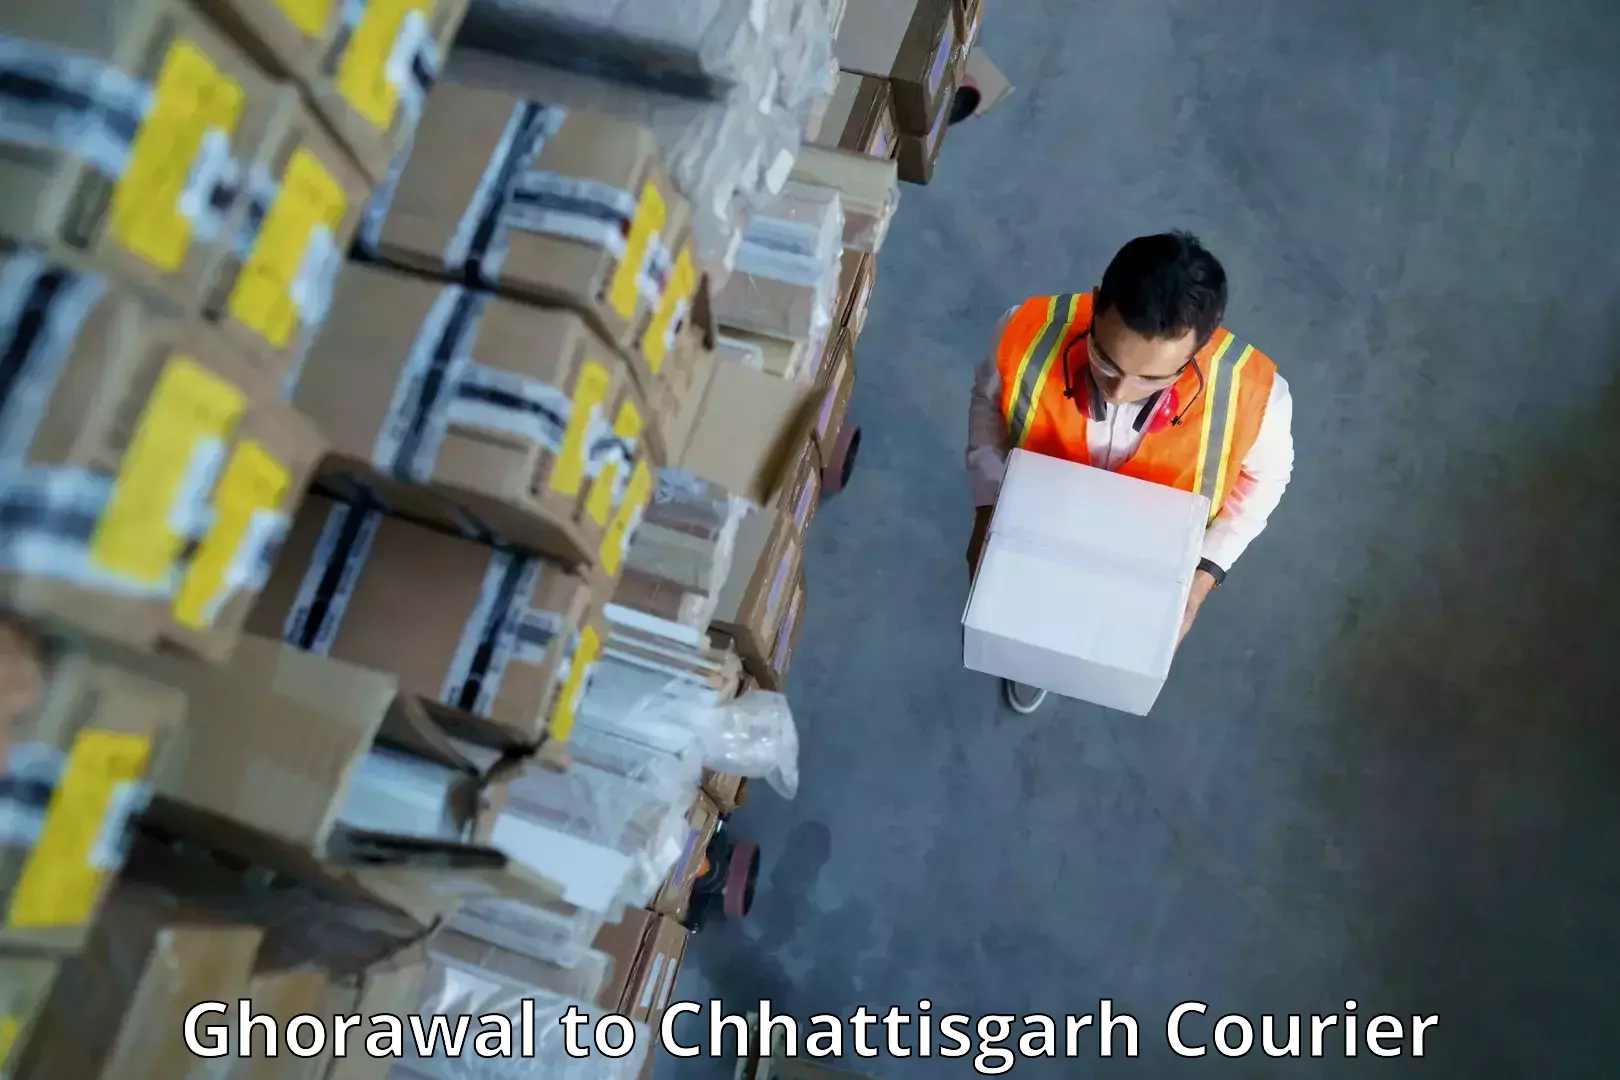 Reliable delivery network Ghorawal to Nagri